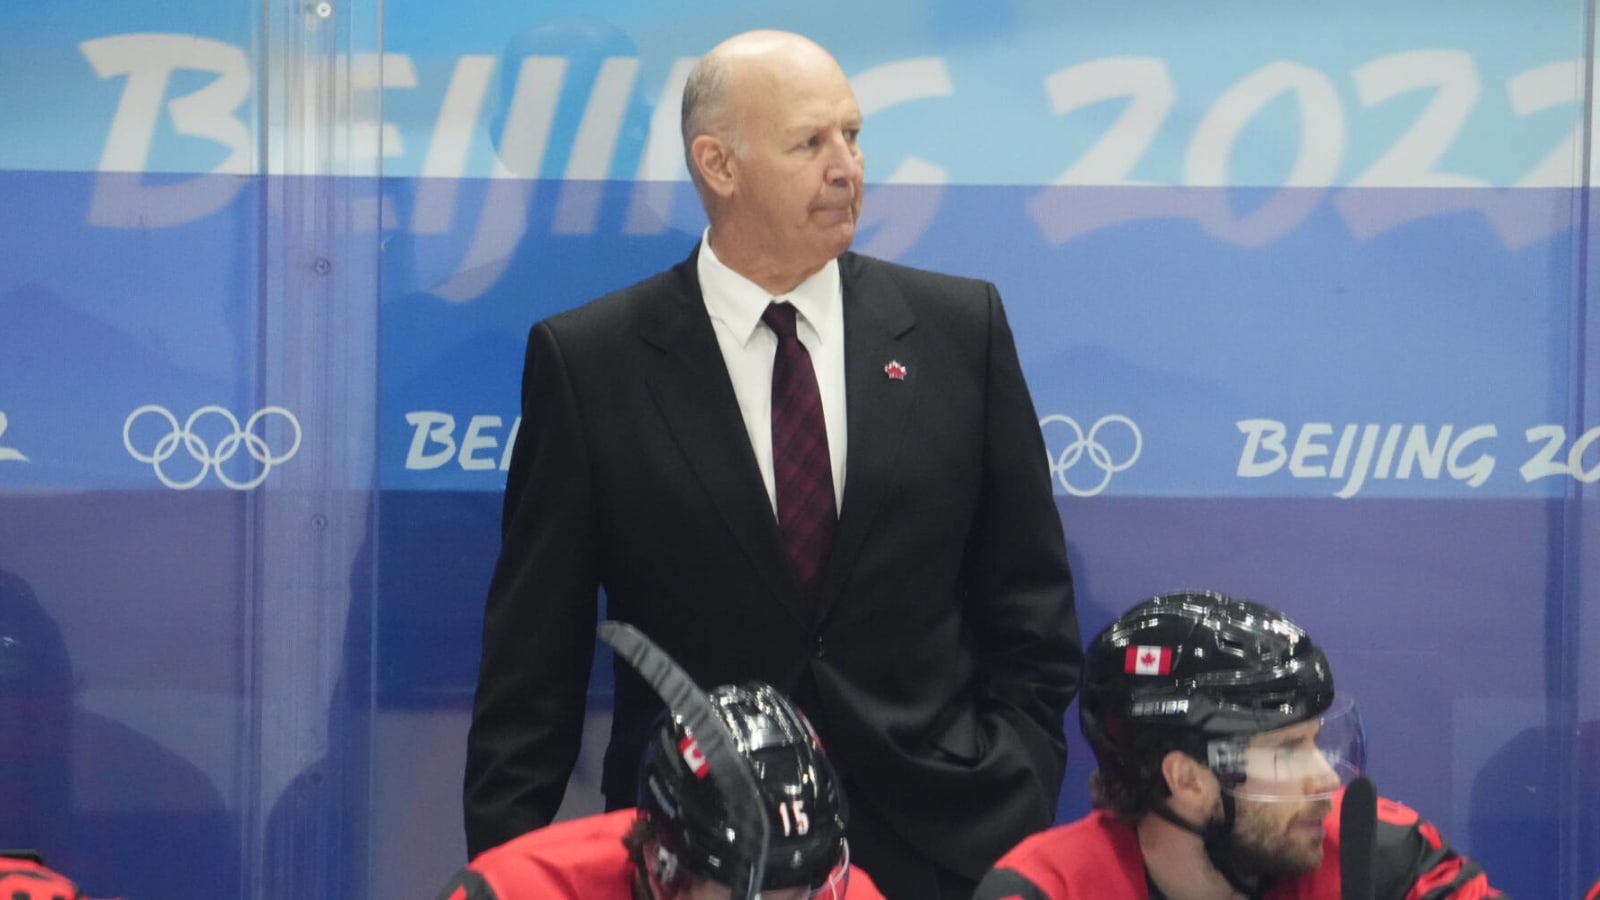 Claude Julien to lead Team Canada at IIHF World Championship